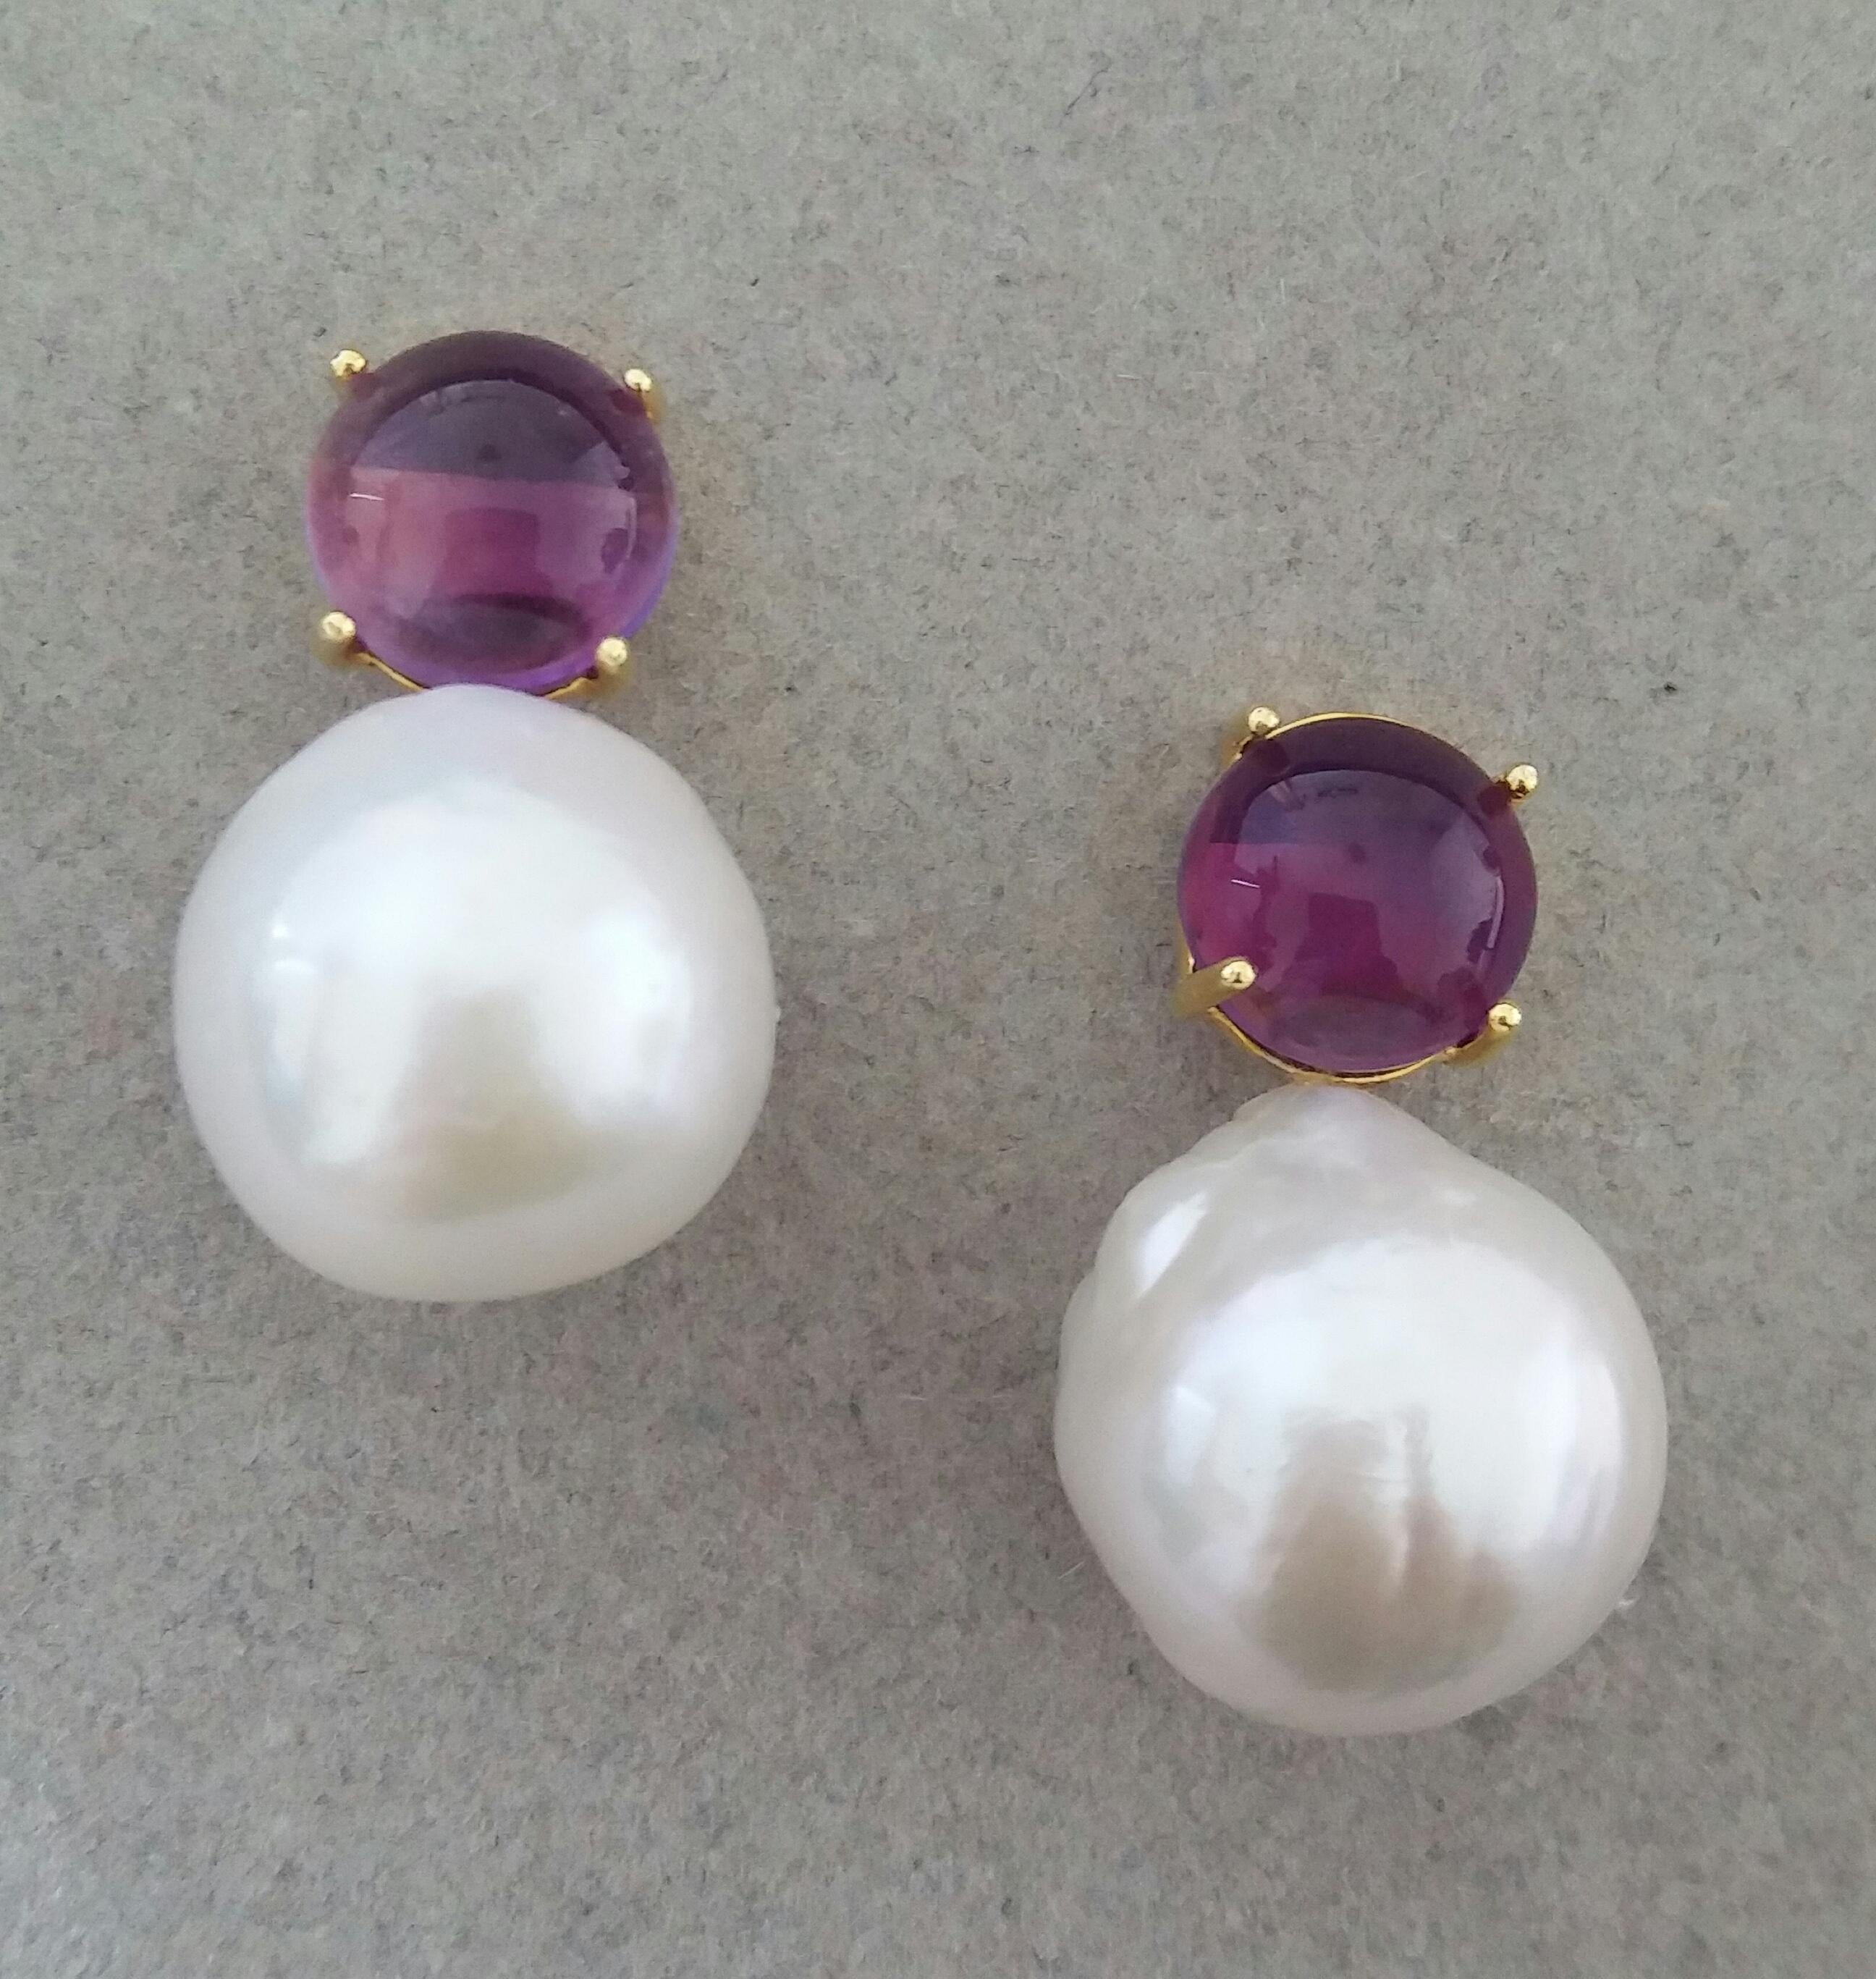 Simple chic stud earrings with a pair of Round Amethyst Cabs measuring 10mm in diameter set in solid 14 Kt. yellow gold on the top and in the lower parts 2 unusual big size and excellent luster White Baroque Pearls measuring 16 mm in diameter and